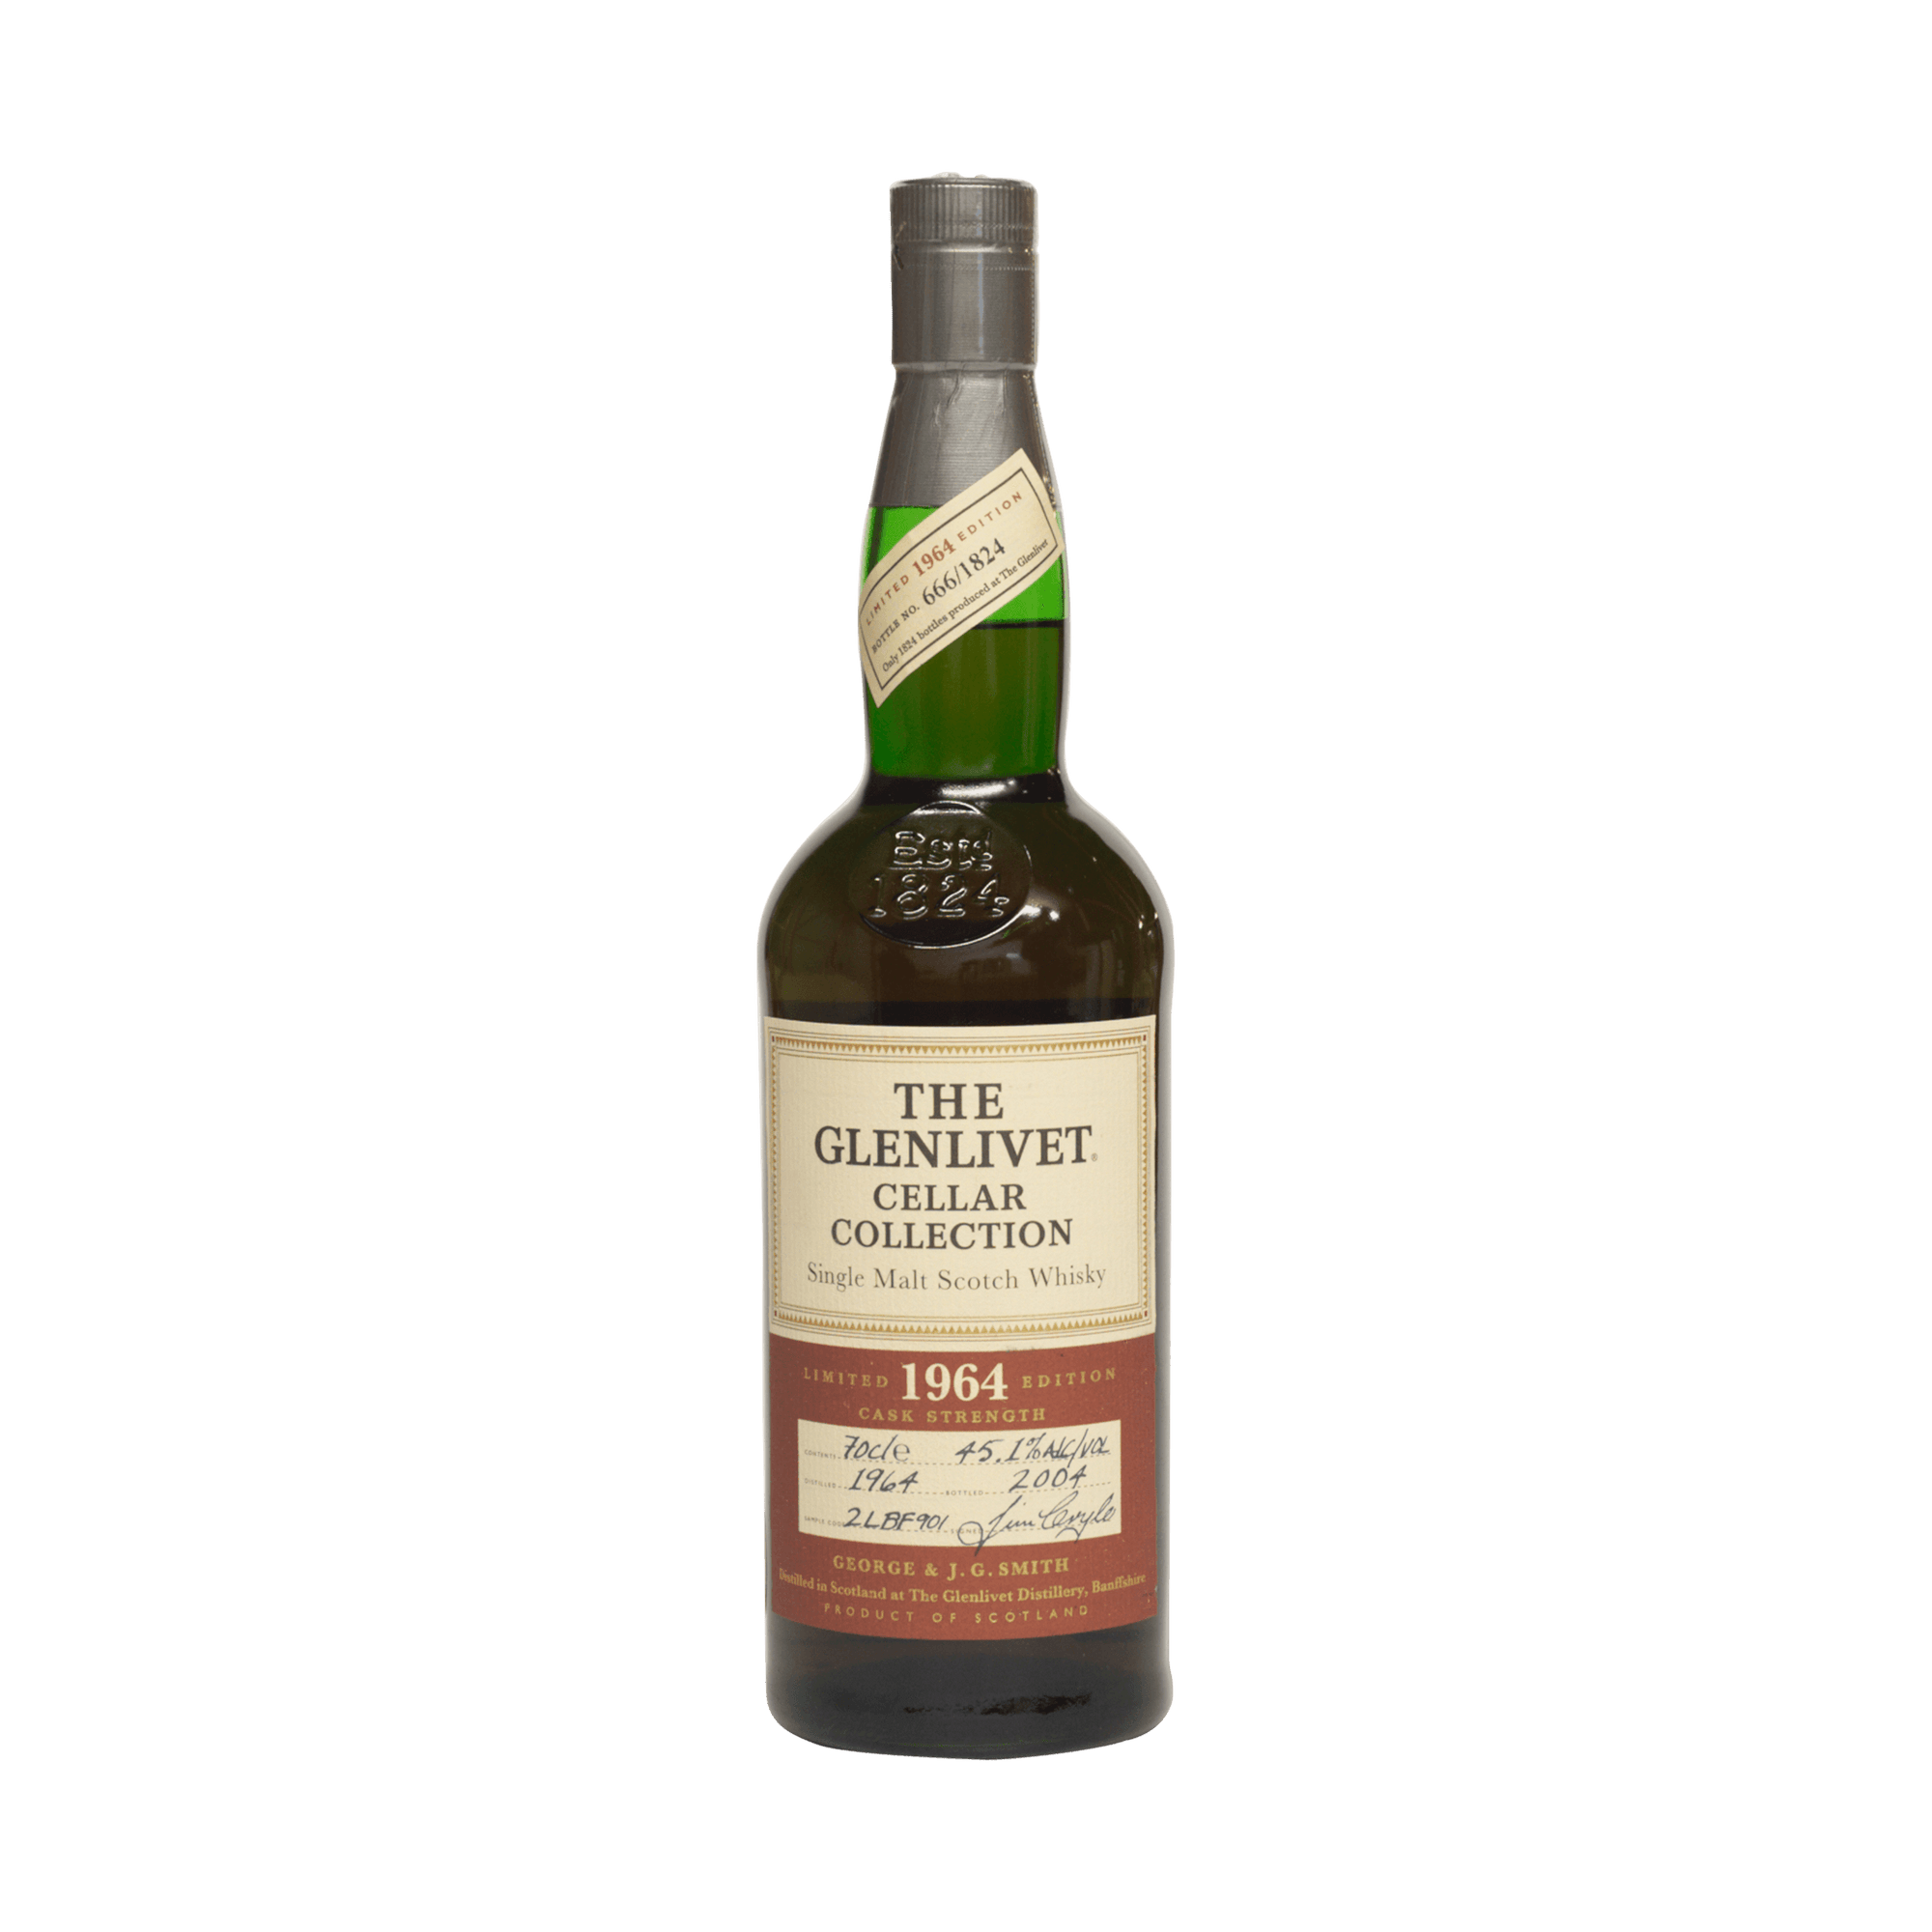 Glenlivet 1964 40 Year Old “The Cellar Collection’ George & JG Smith 45.10%